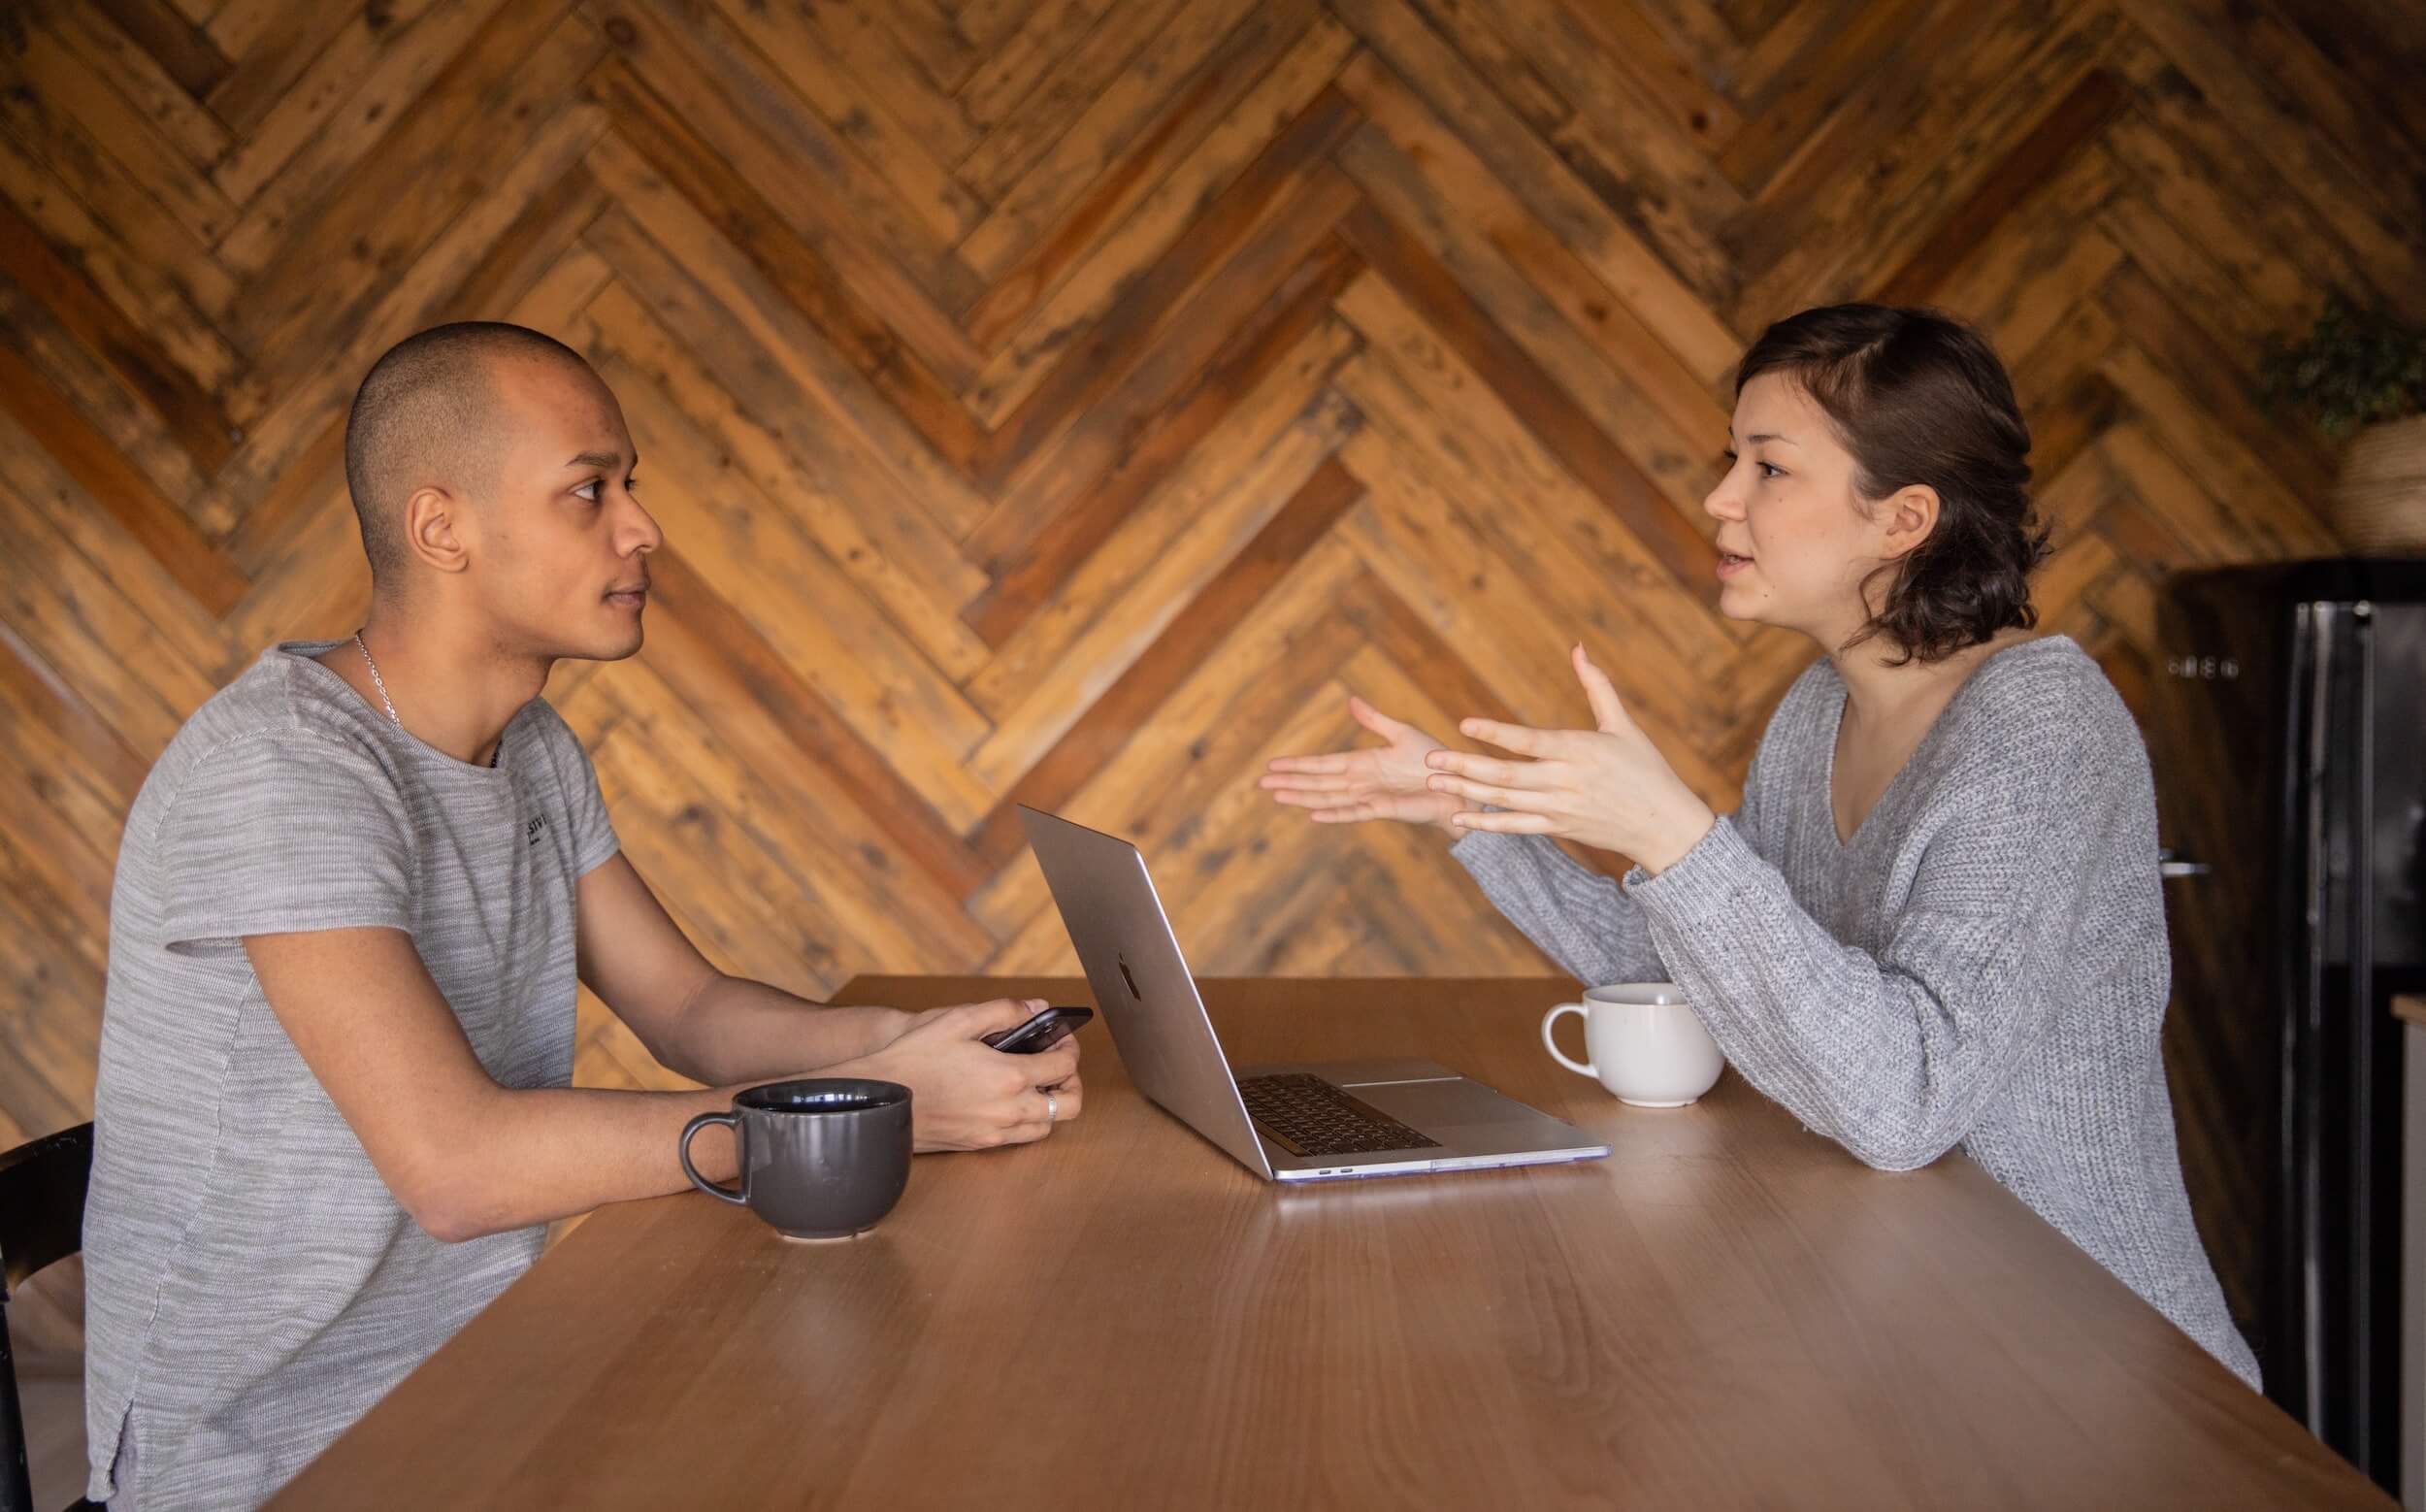 Man and woman talking across a table with a wood panel wall behind them.